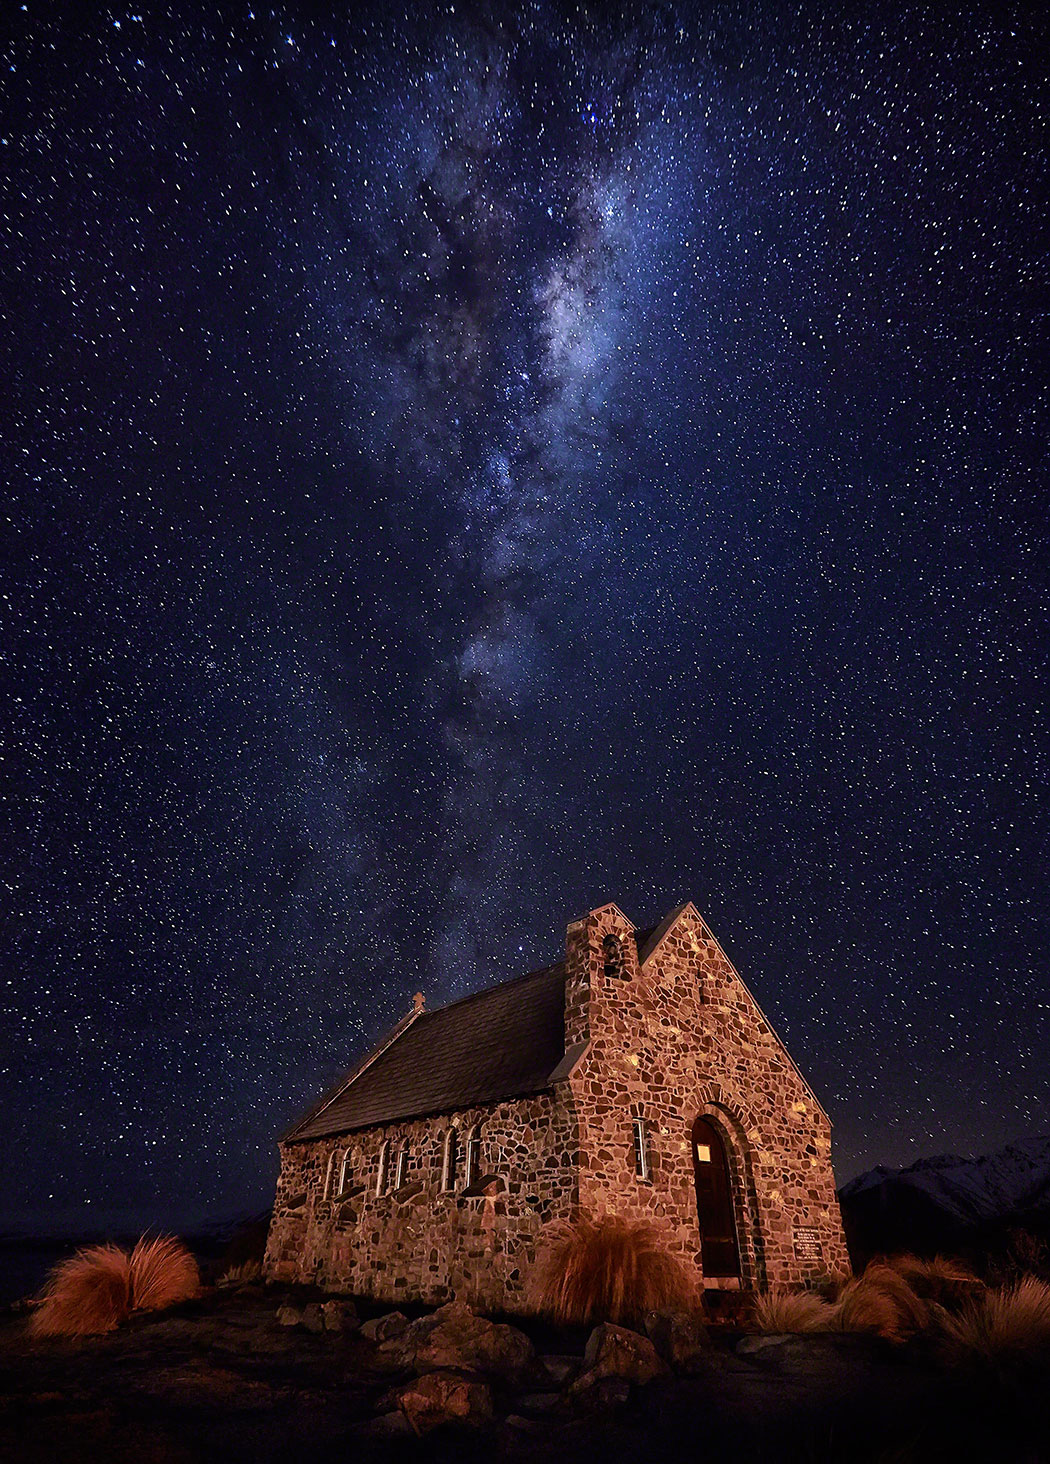 While Shepherds Watched Night Sky Star Astro Photography Guide Paul Reiffer Professional Photographer Church Of Good Shepherd Lake Tekapo Milky Way How To New Zealand Queenstown crop